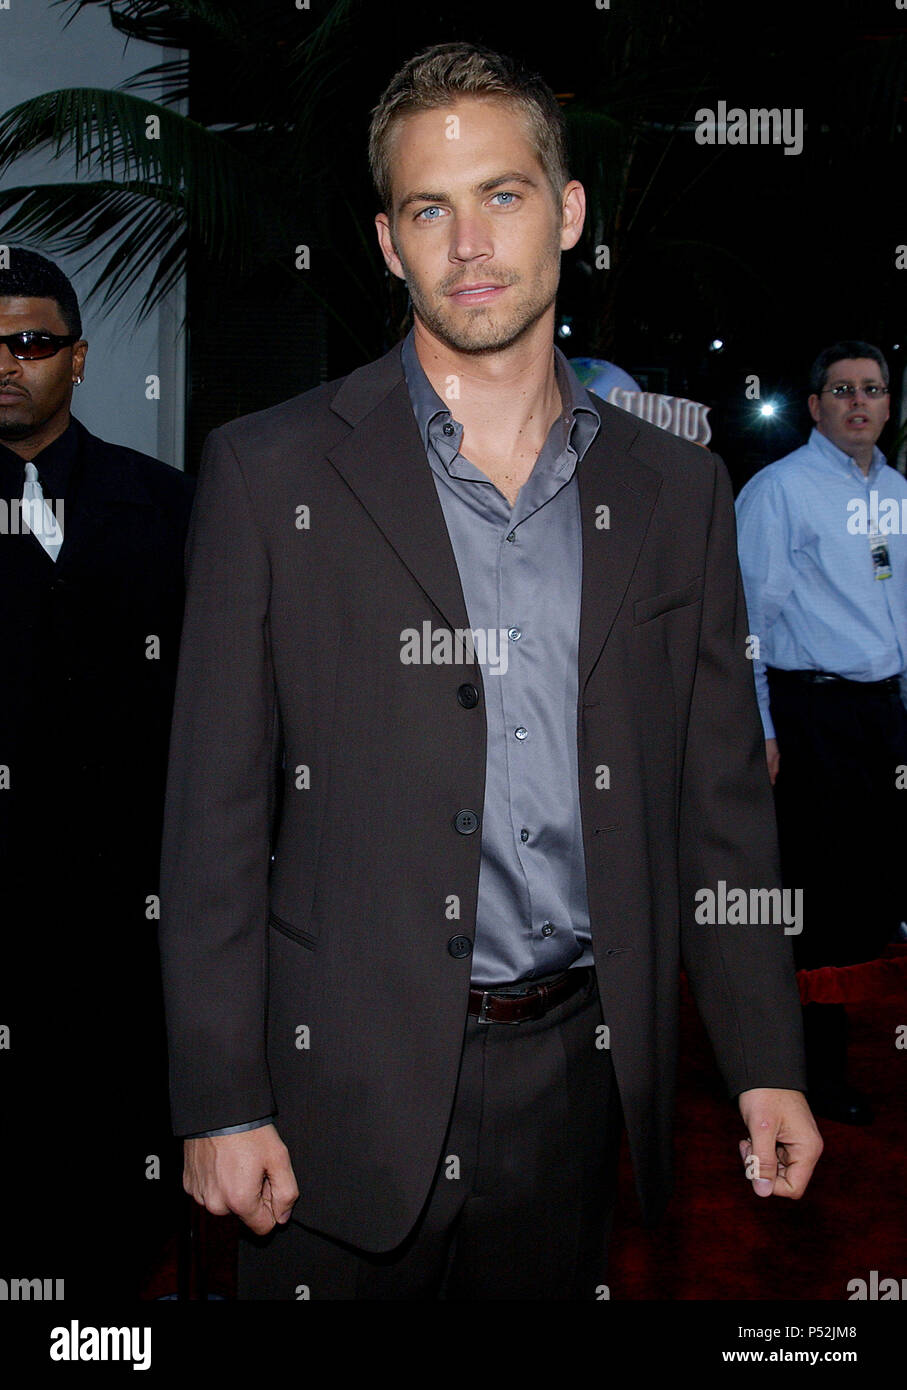 Paul Walker arriving at the ' 2 Fast 2 Furious Premiere ' at the Universal Theatre in Los Angeles. June 3, 2003.WalkerPaul77 Red Carpet Event, Vertical, USA, Film Industry, Celebrities,  Photography, Bestof, Arts Culture and Entertainment, Topix Celebrities fashion /  Vertical, Best of, Event in Hollywood Life - California,  Red Carpet and backstage, USA, Film Industry, Celebrities,  movie celebrities, TV celebrities, Music celebrities, Photography, Bestof, Arts Culture and Entertainment,  Topix, vertical, one person,, from the years , 2003 to 2005, inquiry tsuni@Gamma-USA.com - Three Quarters Stock Photo